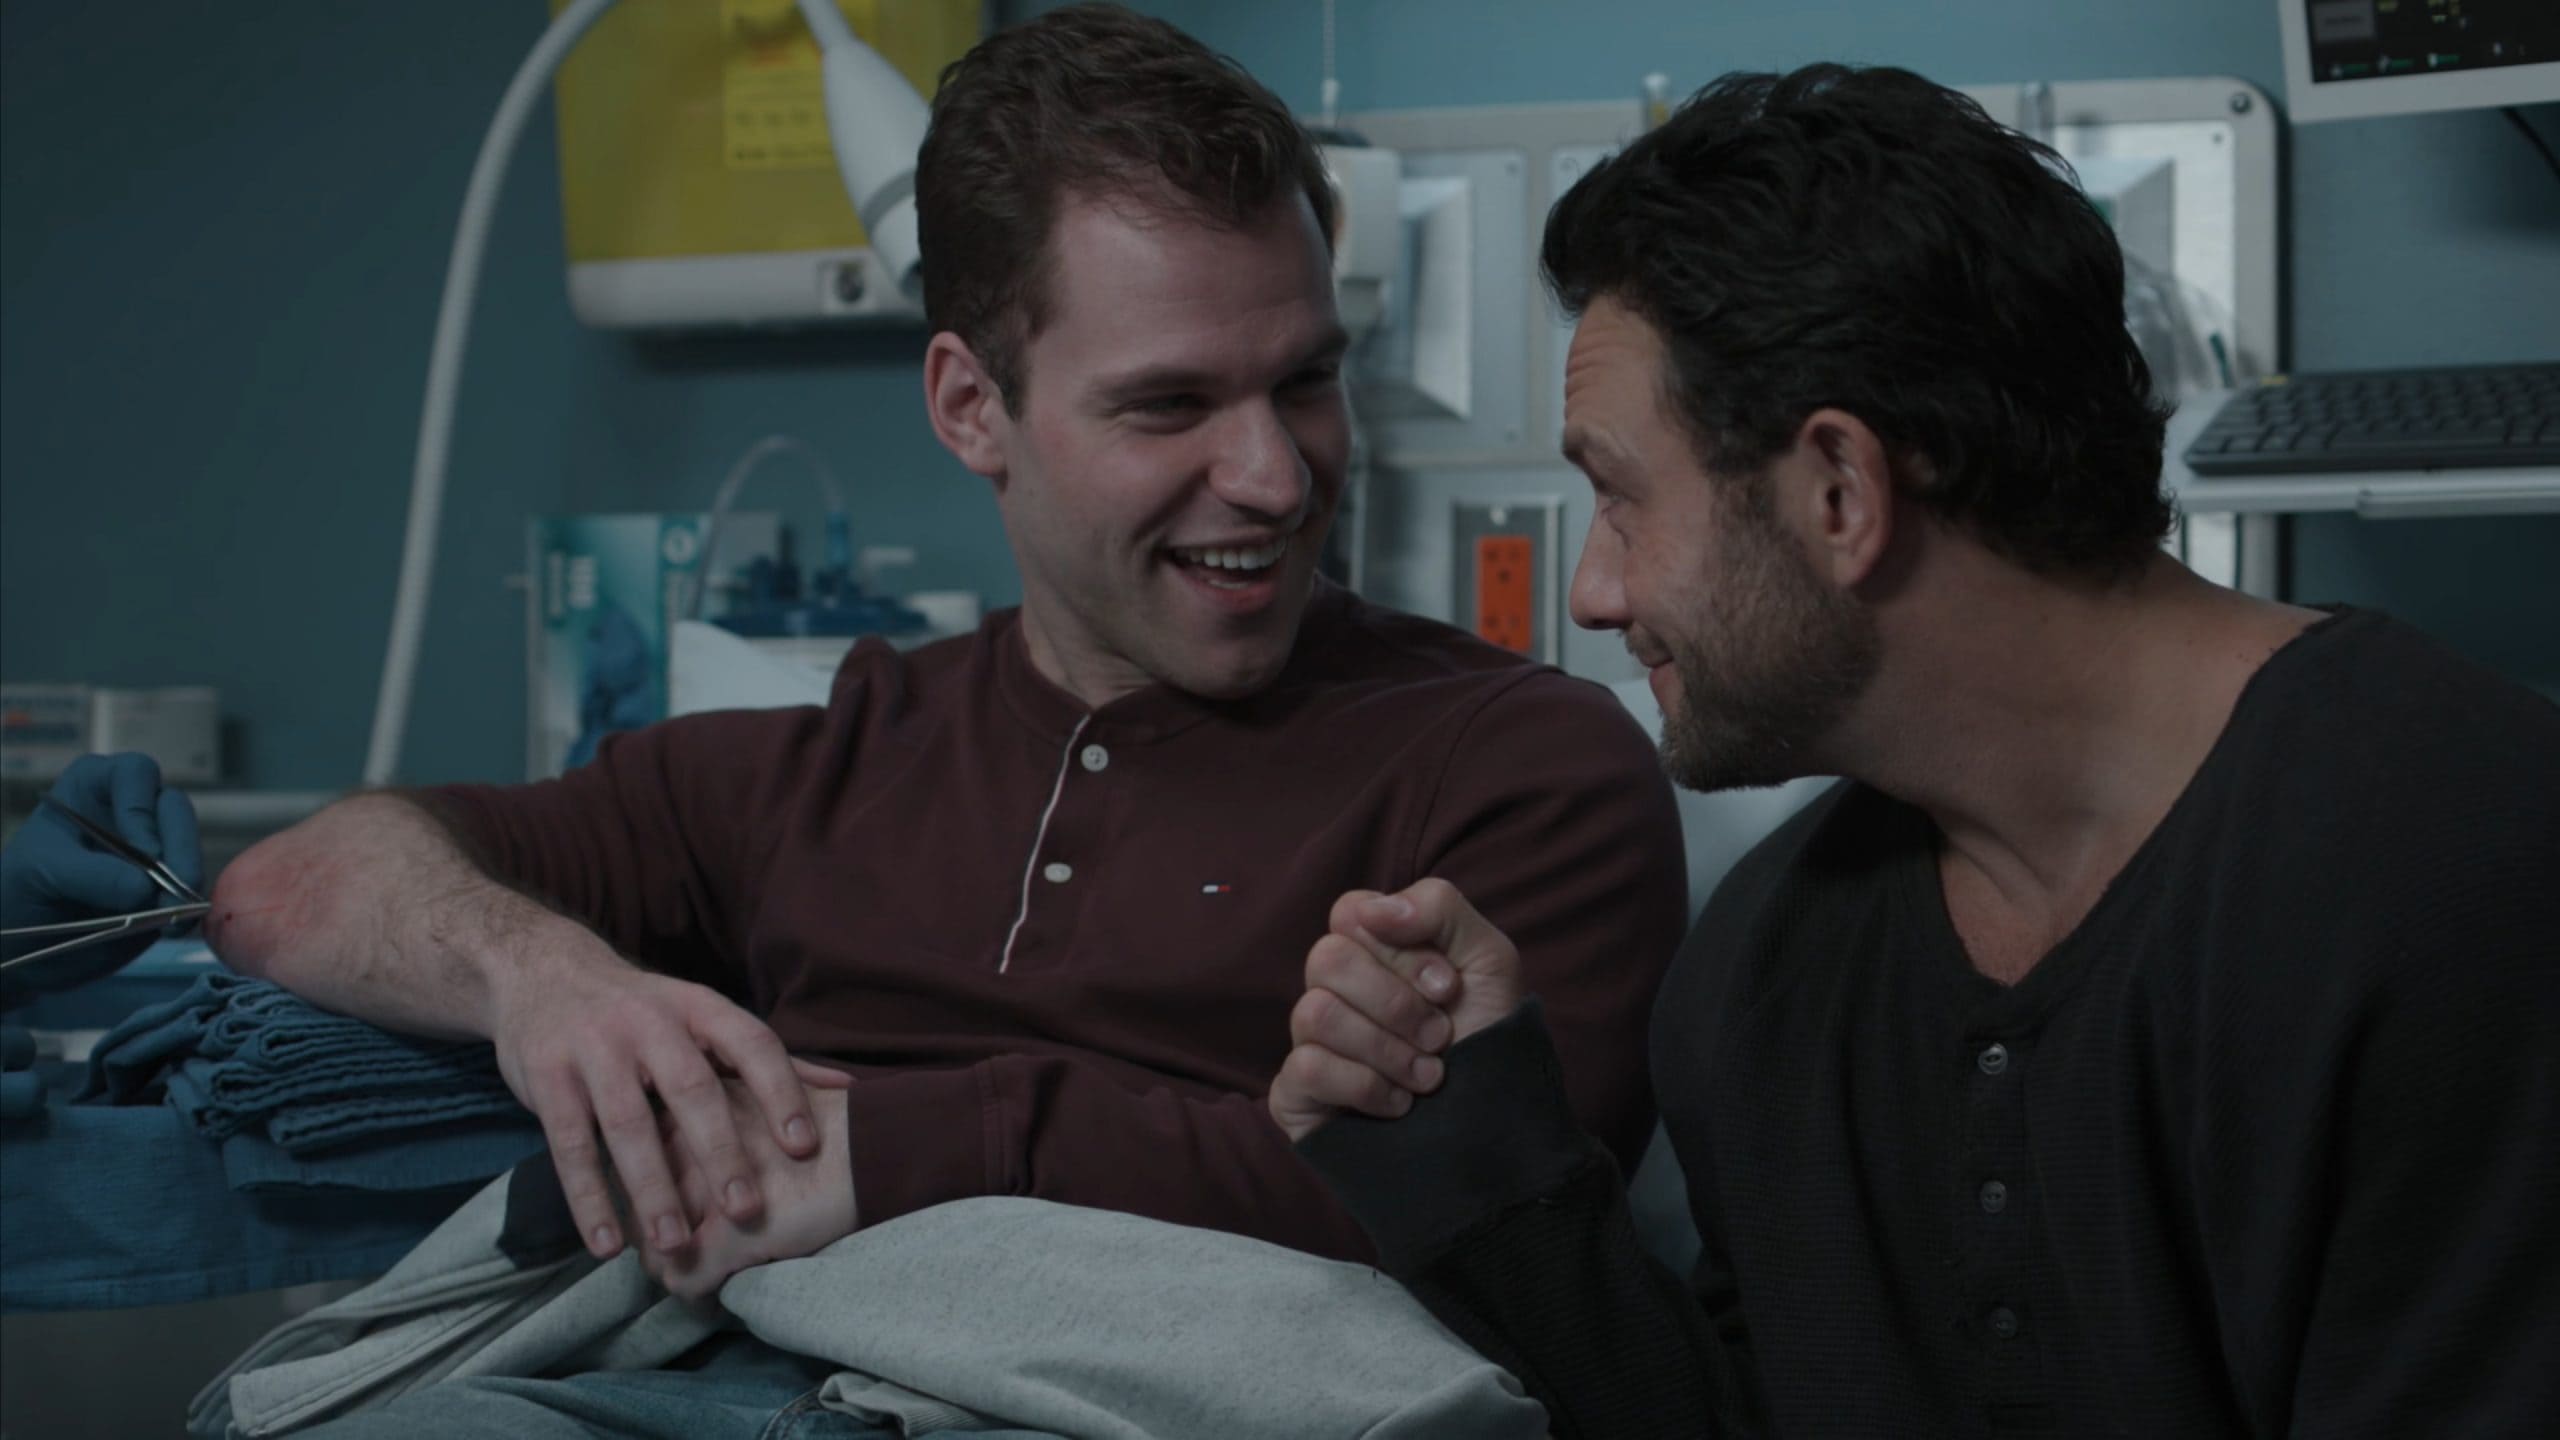 Ollie (Reggie Herold) smiling at his brother, as doctors examine him